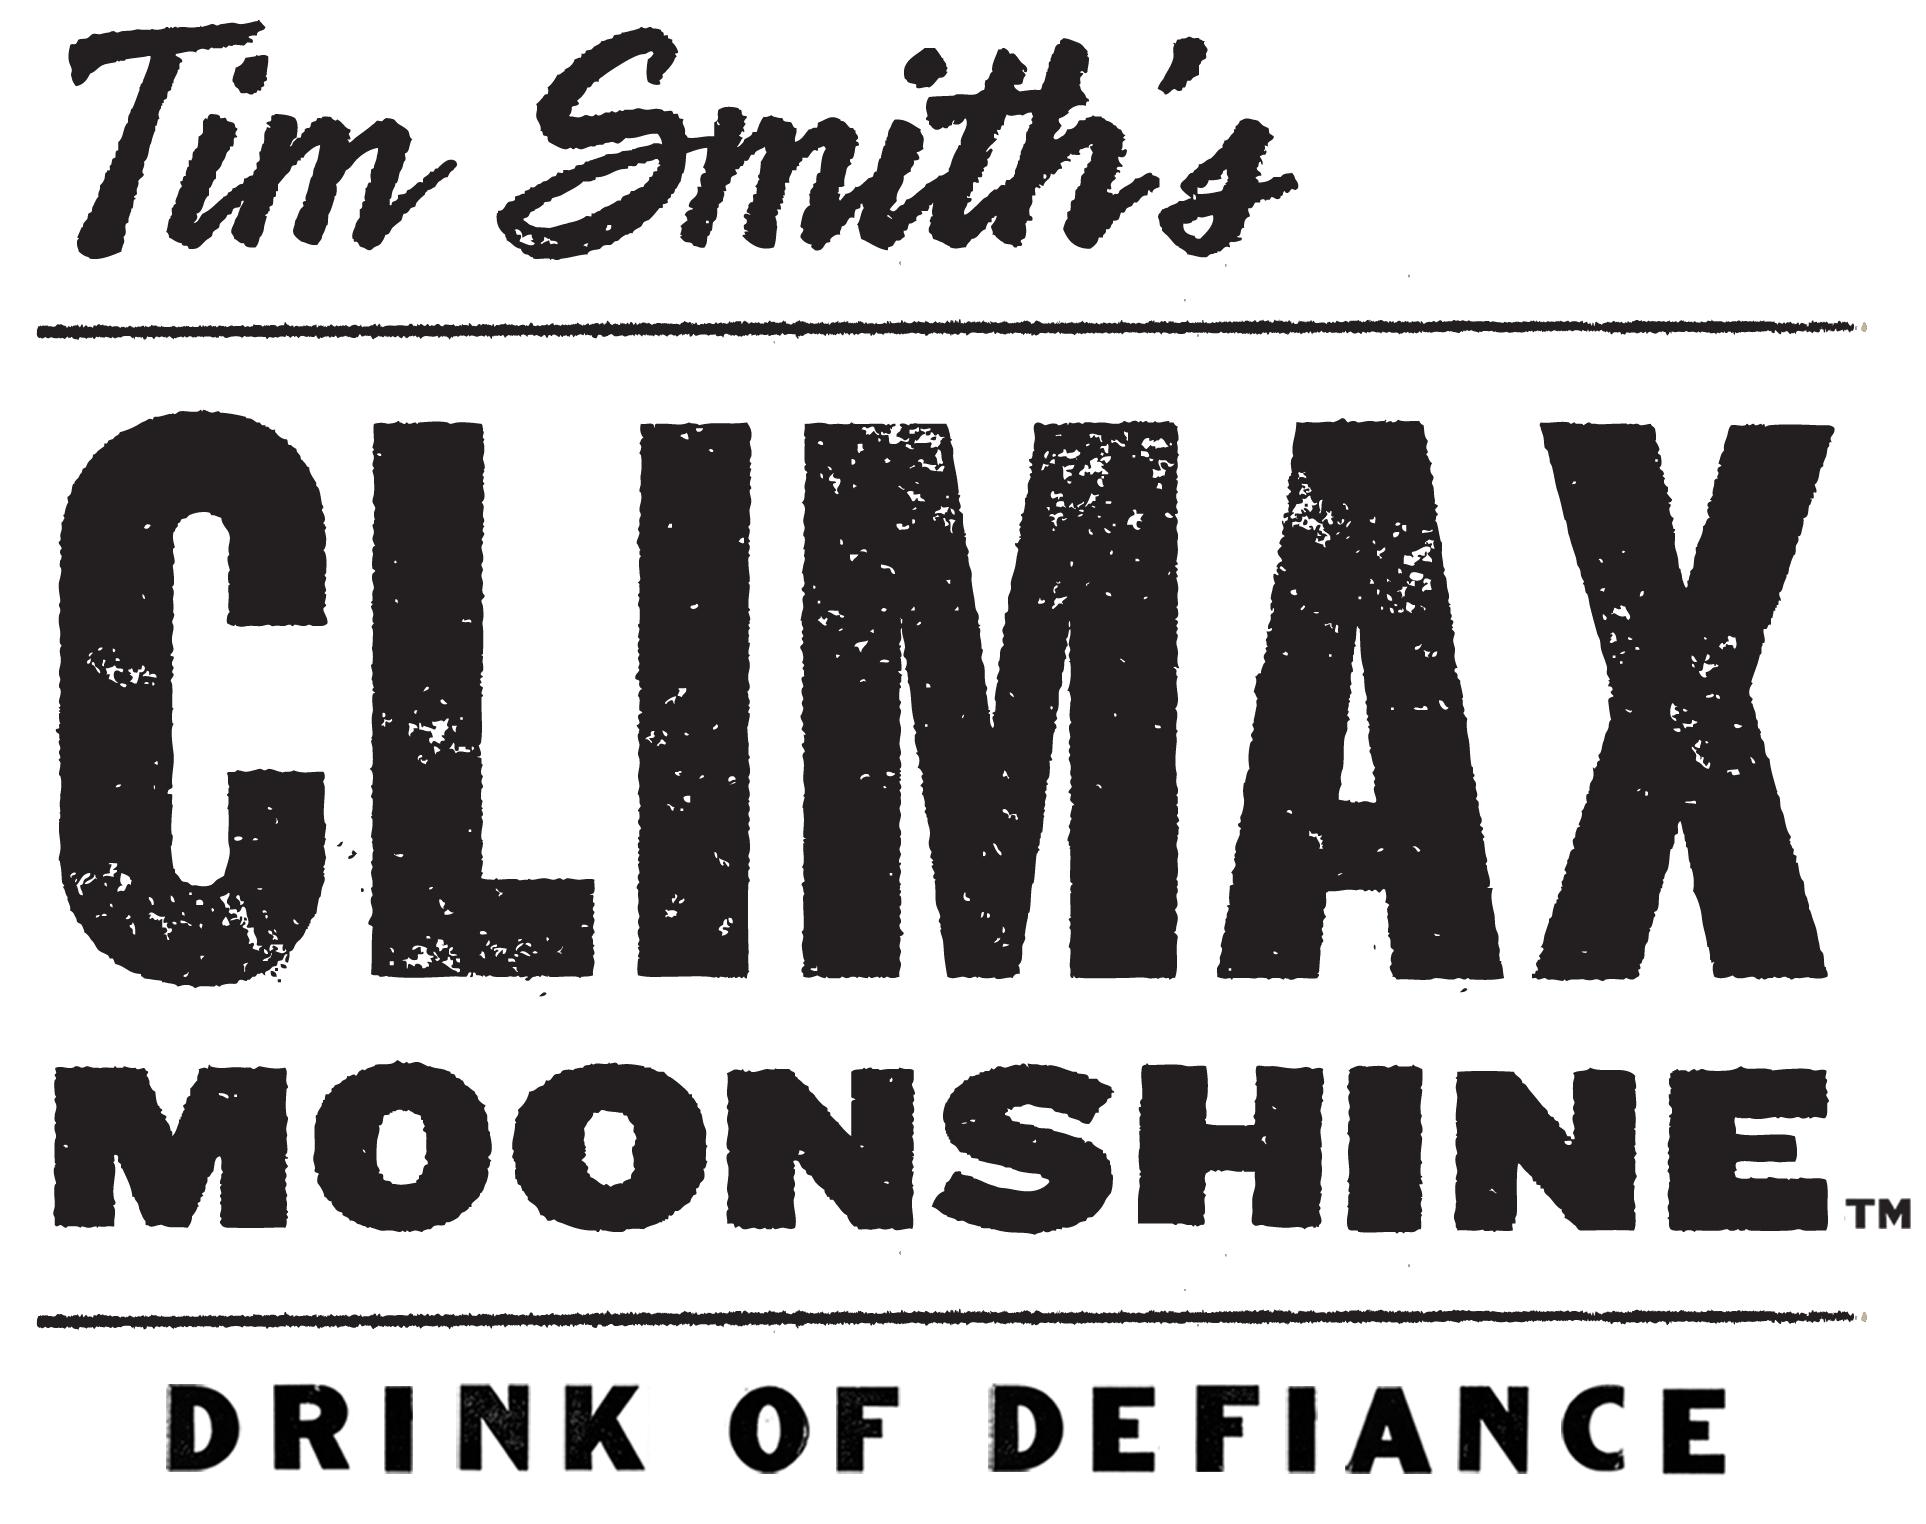 Moonshiner Tim Smith Goes Legit, Launches Smith's Moonshine Brand